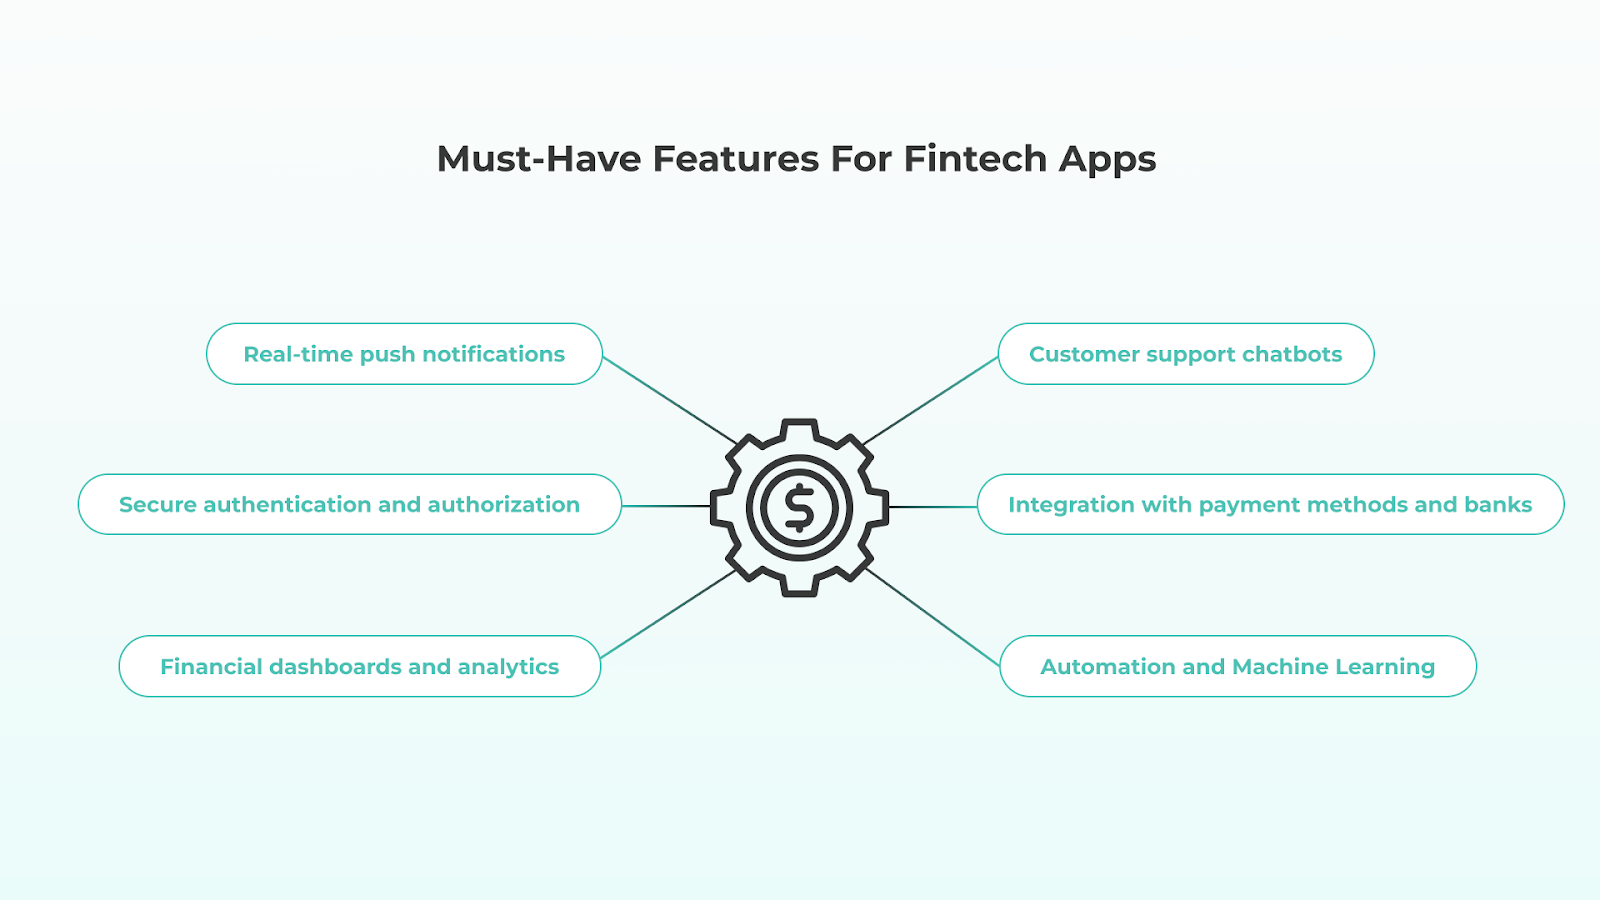 MUST-HAVE FEATURES FOR FINTECH APPS